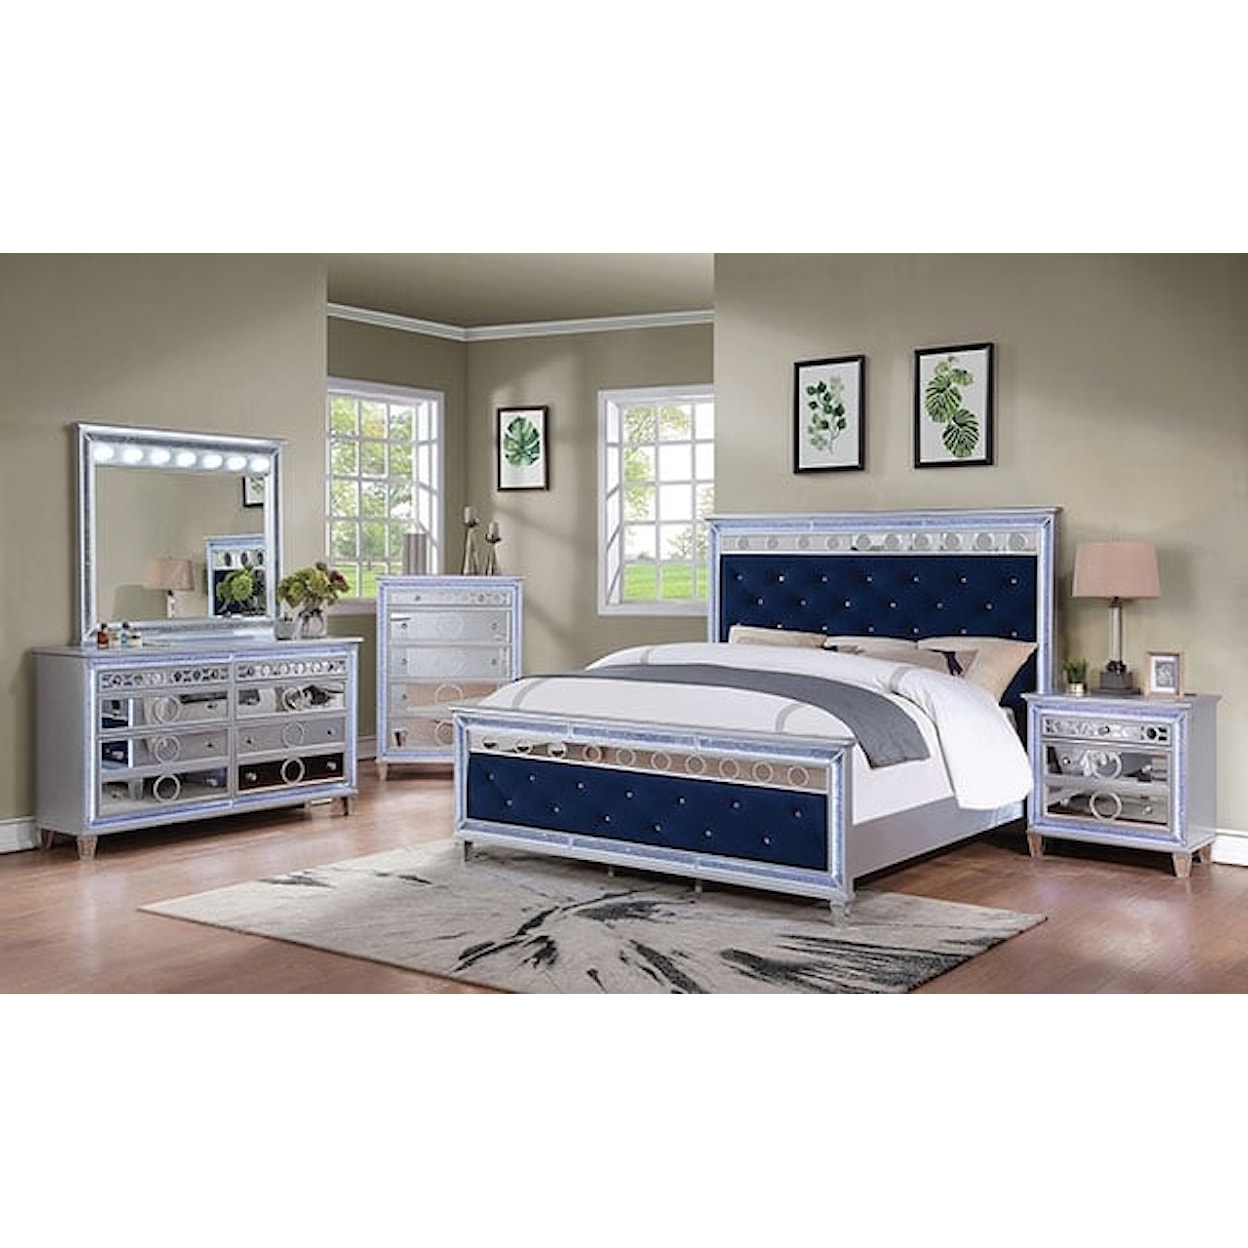 Furniture of America Mairead 8-Drawer Dresser with Mirrored Panels